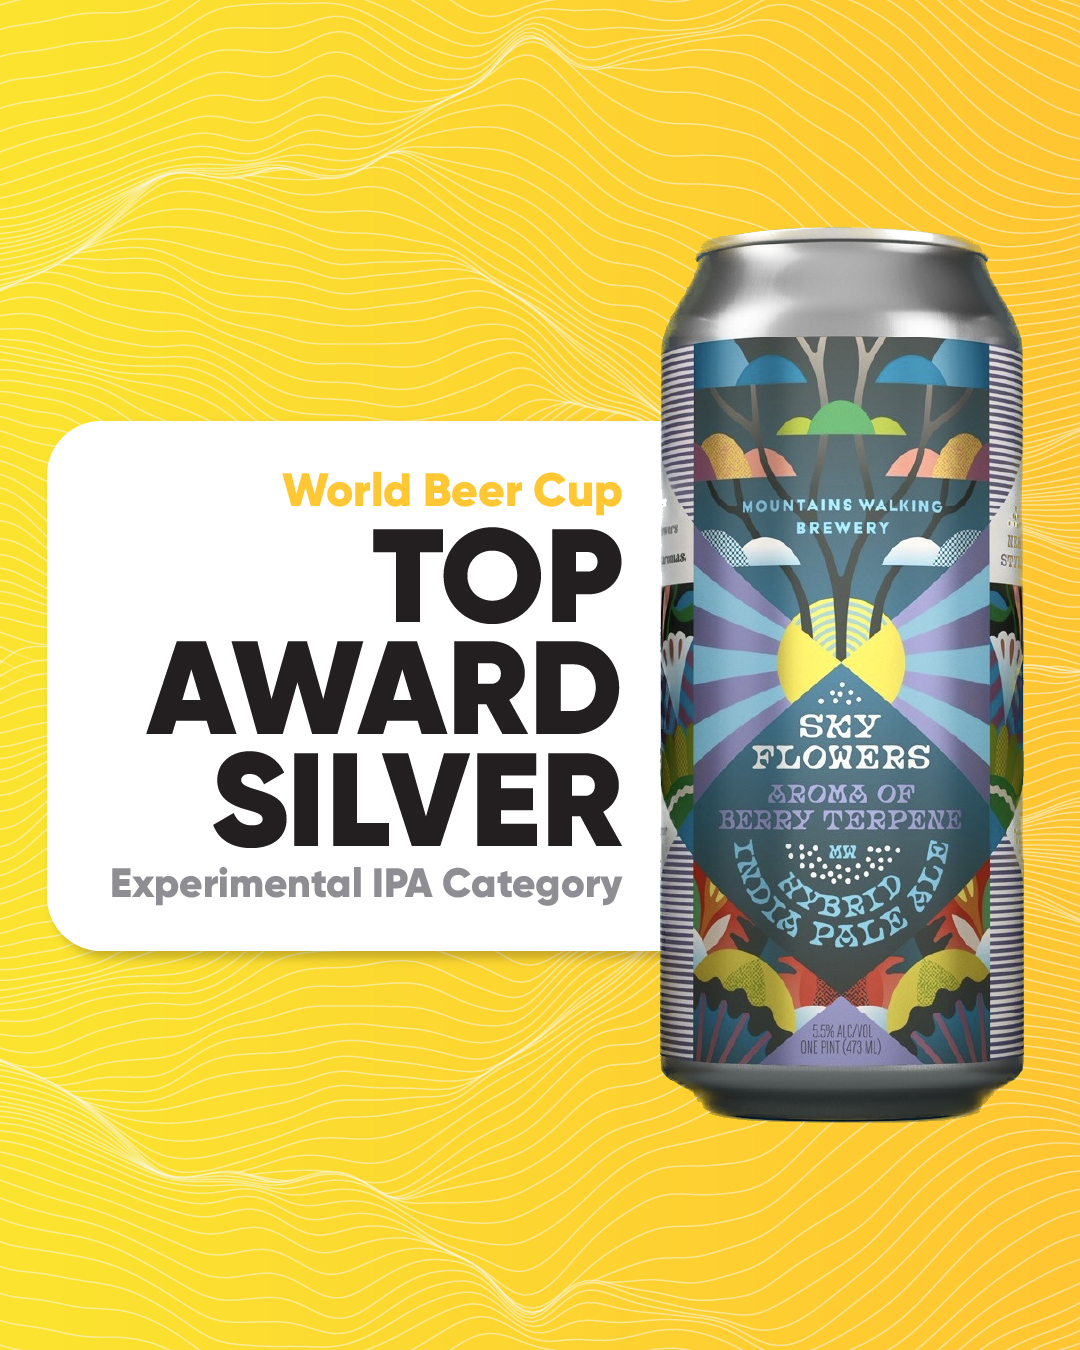 Abstrax Hops Awards Mountains Walking Beer with Best-in-Show